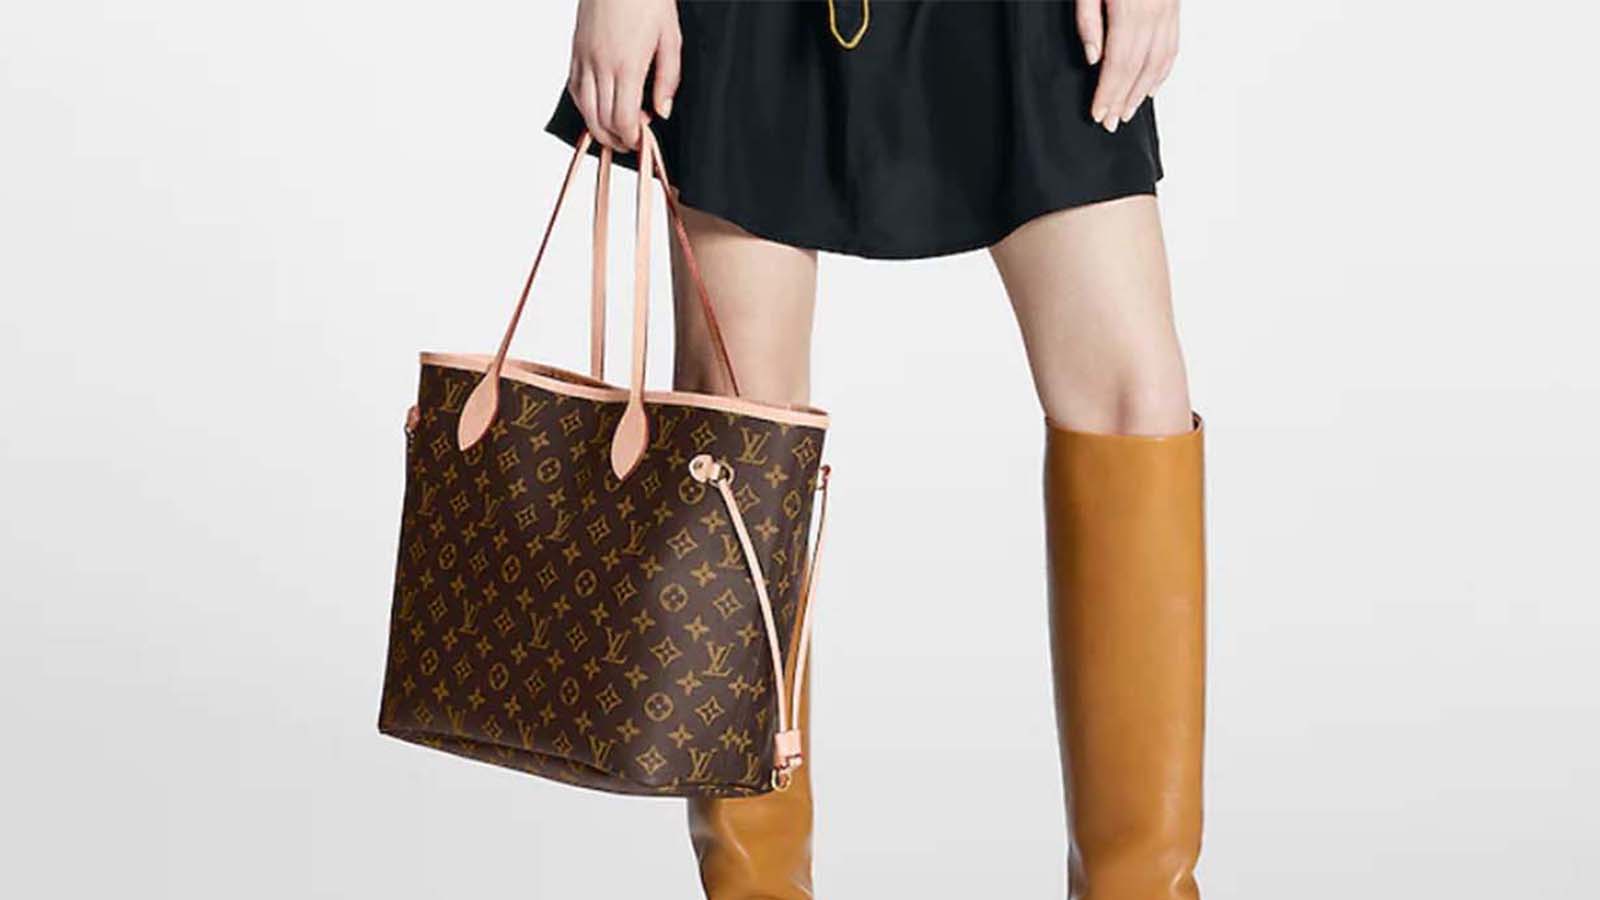 Thoughts on Neverfull MM as a work bag? Will it be